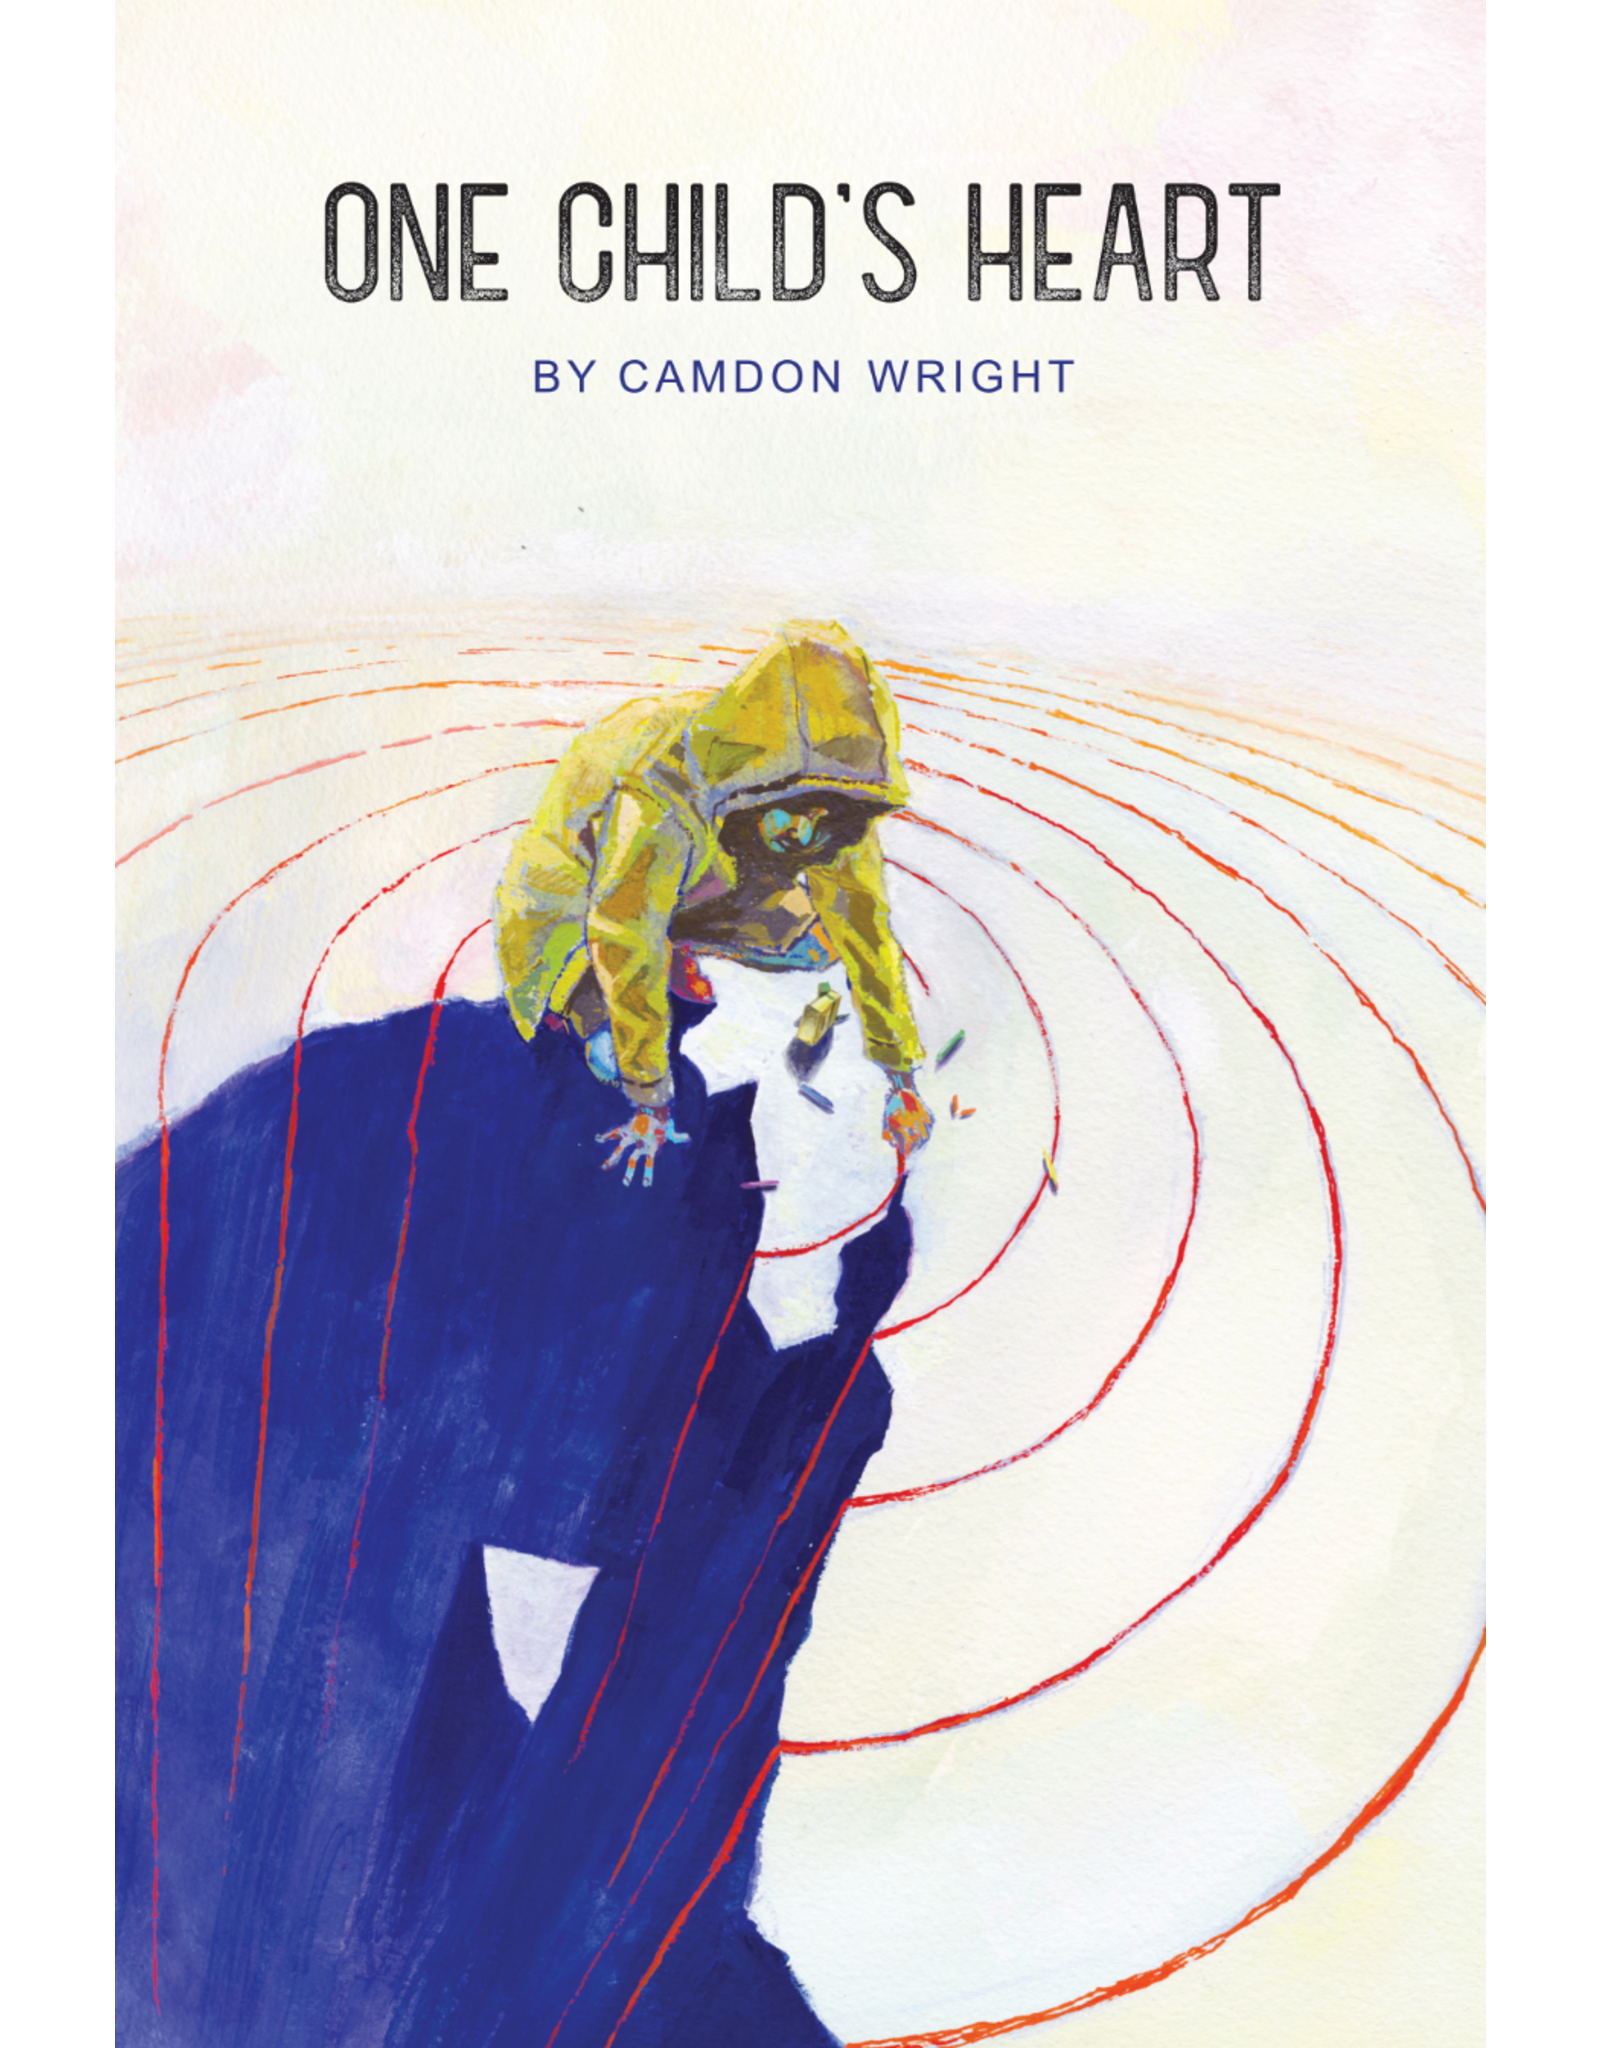 One Child's Heart